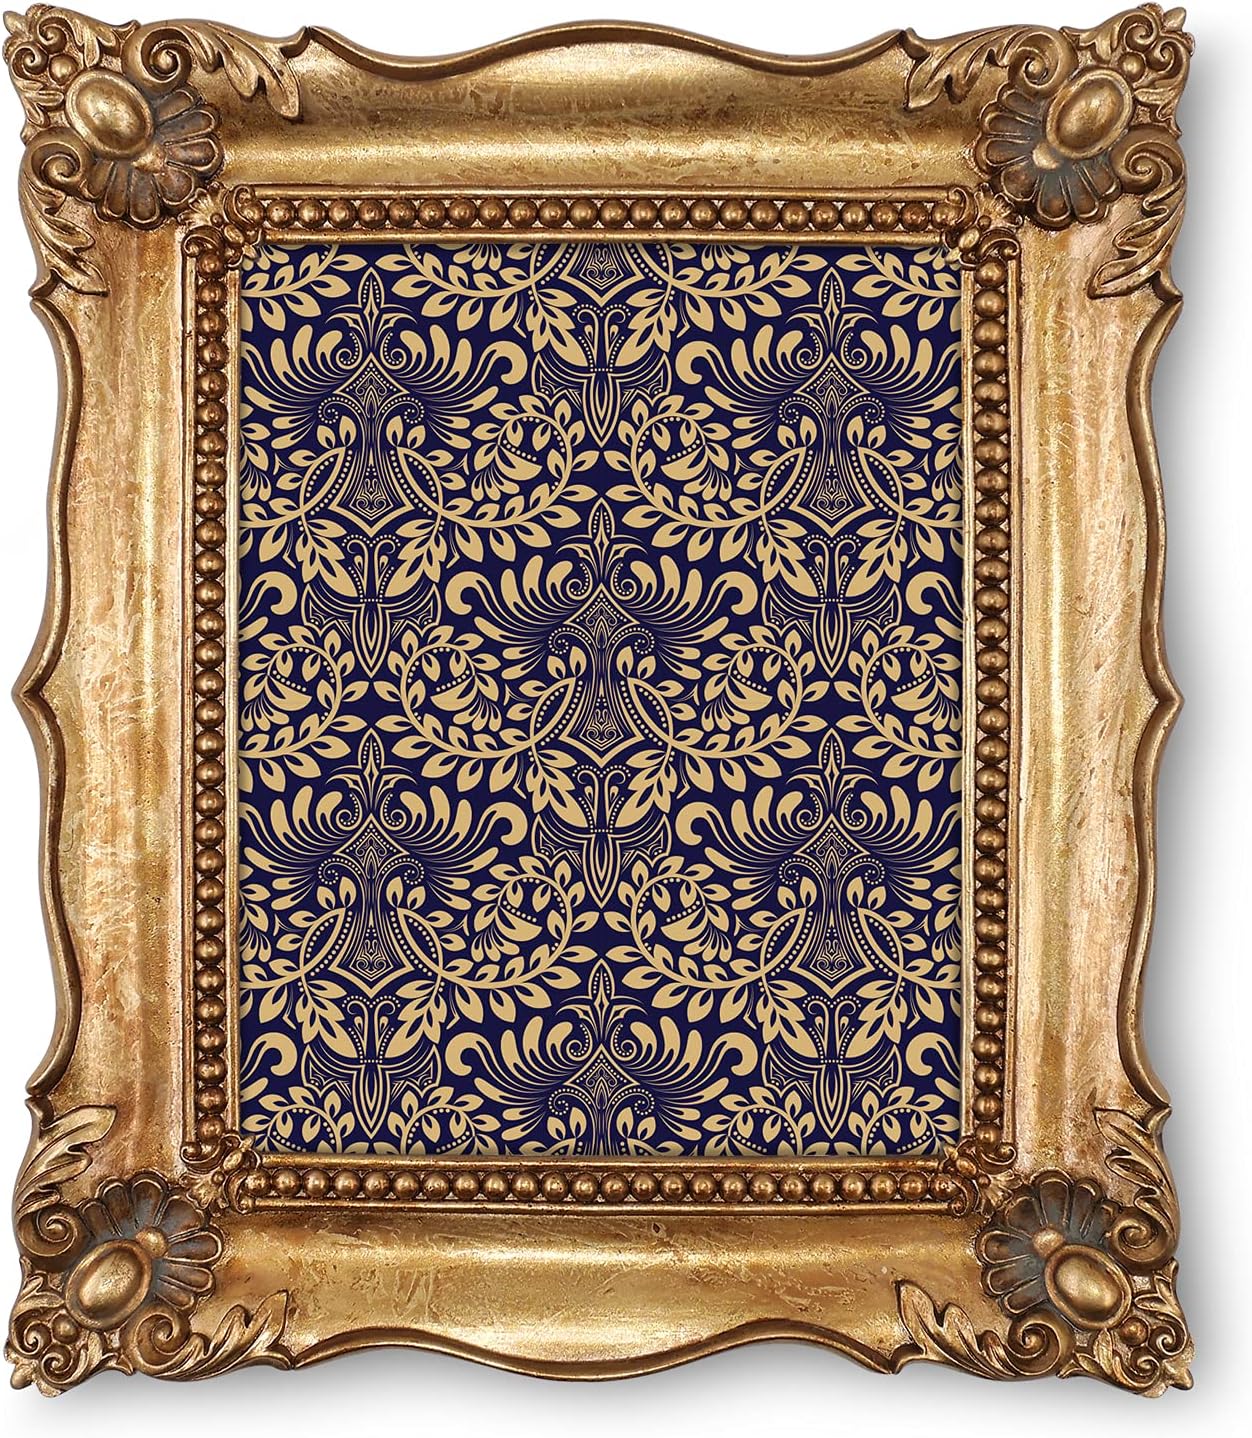 Simon's Shop 8x10 Picture Frame Baroque Picture Frames 8 by 10 Vintage Frames for Picture Artwork in Black & Gold